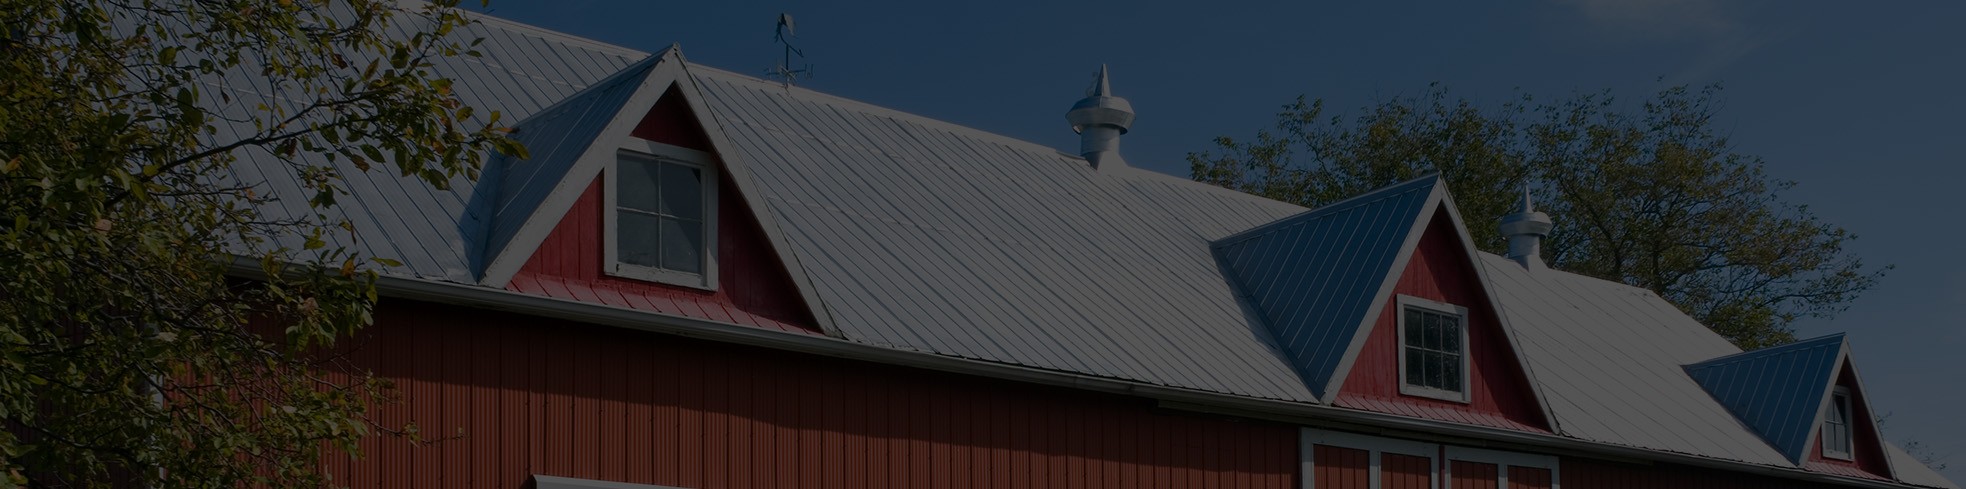 Milwaukee roofing service materials, galvalume